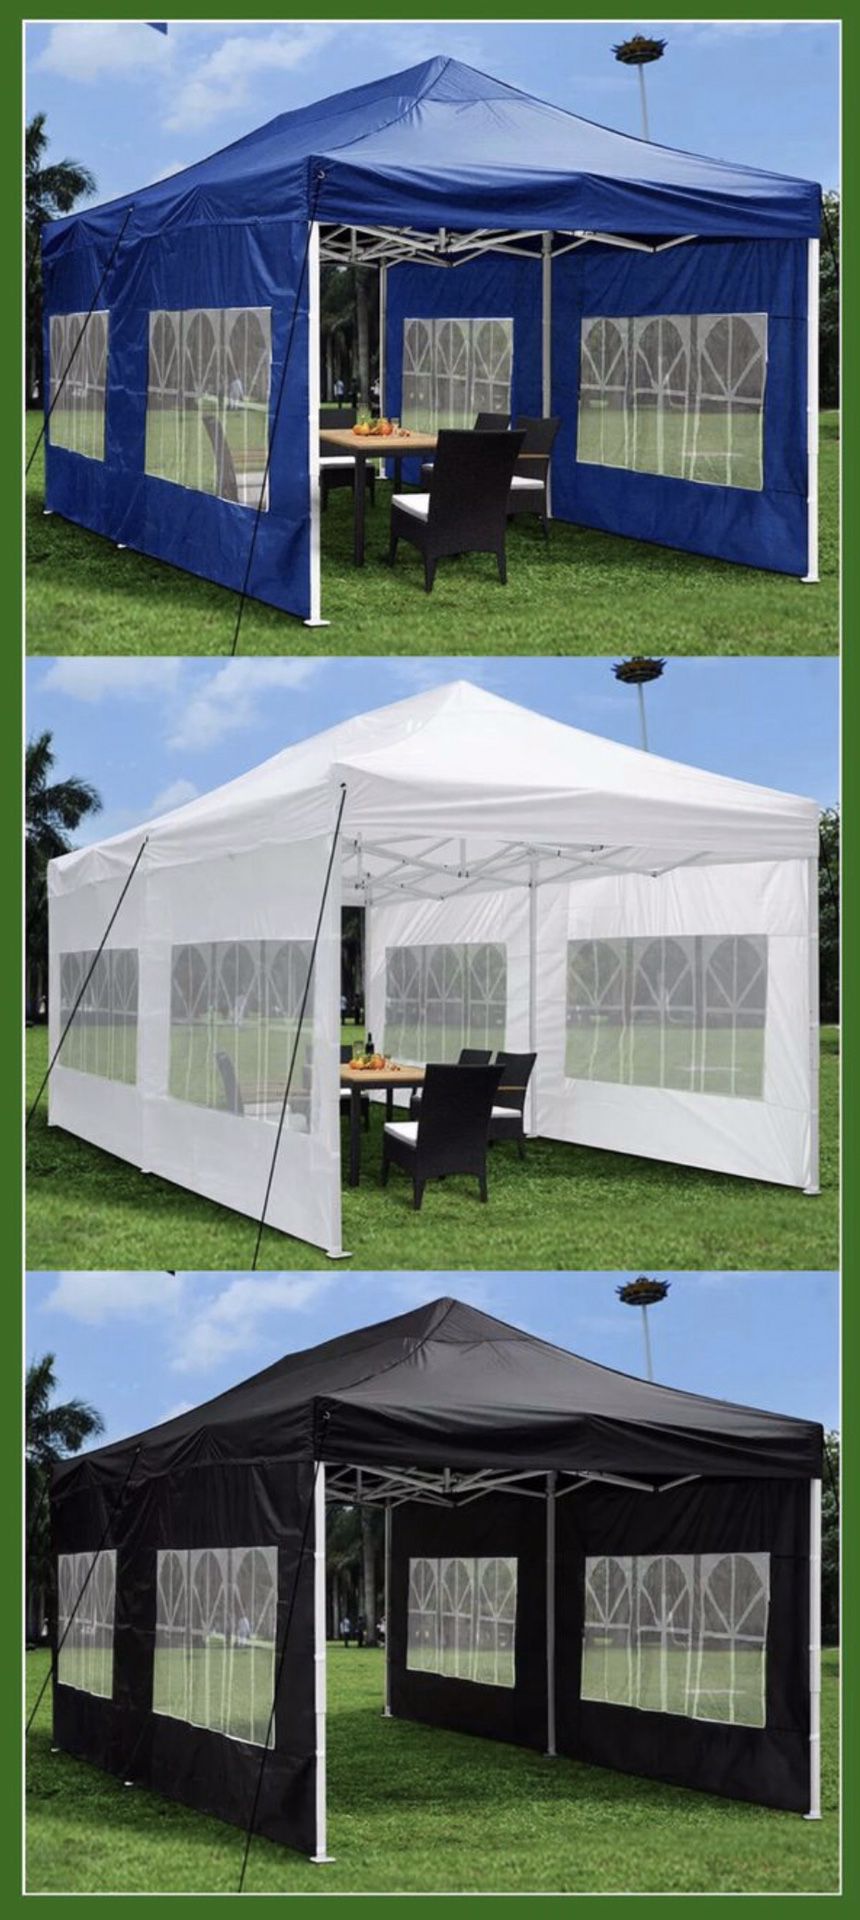 ☀️☀️☀️OUTDOOR CANOPY TENT WITH SIDE WALLS 10x20ft☀️☀️☀️